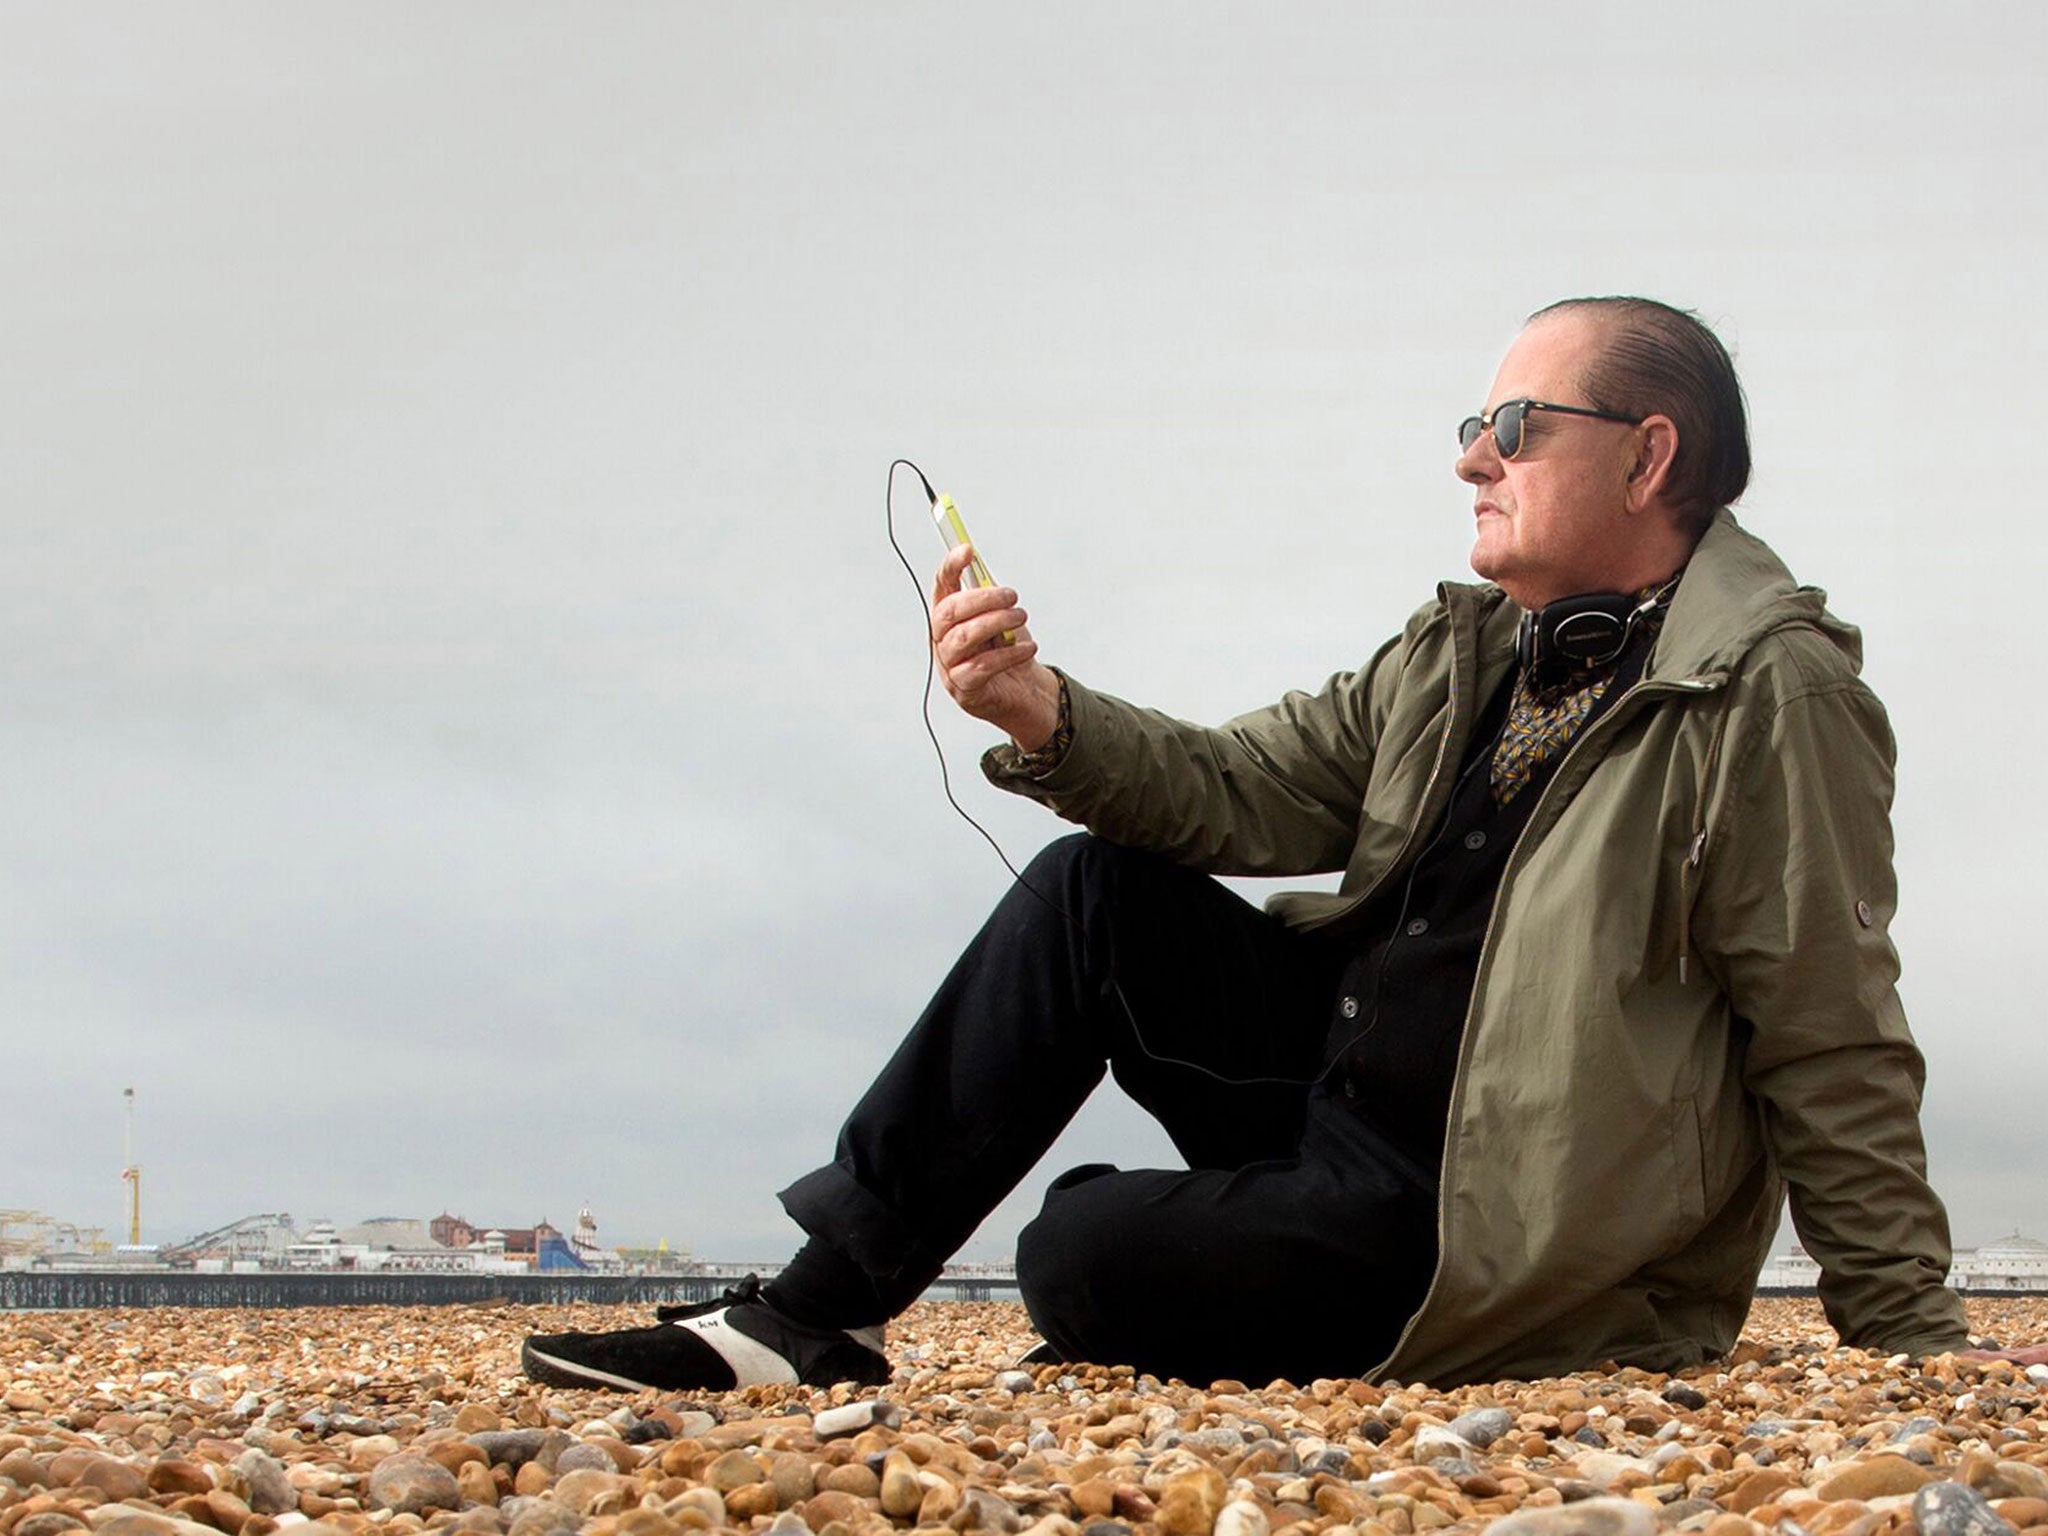 Musician and producer Martyn Ware on Brighton beach, as the public is being asked to record the noises of seashores across the UK in order to build up a 'sound map' of the country's coastline which will be added to the British Library's Sound Archive